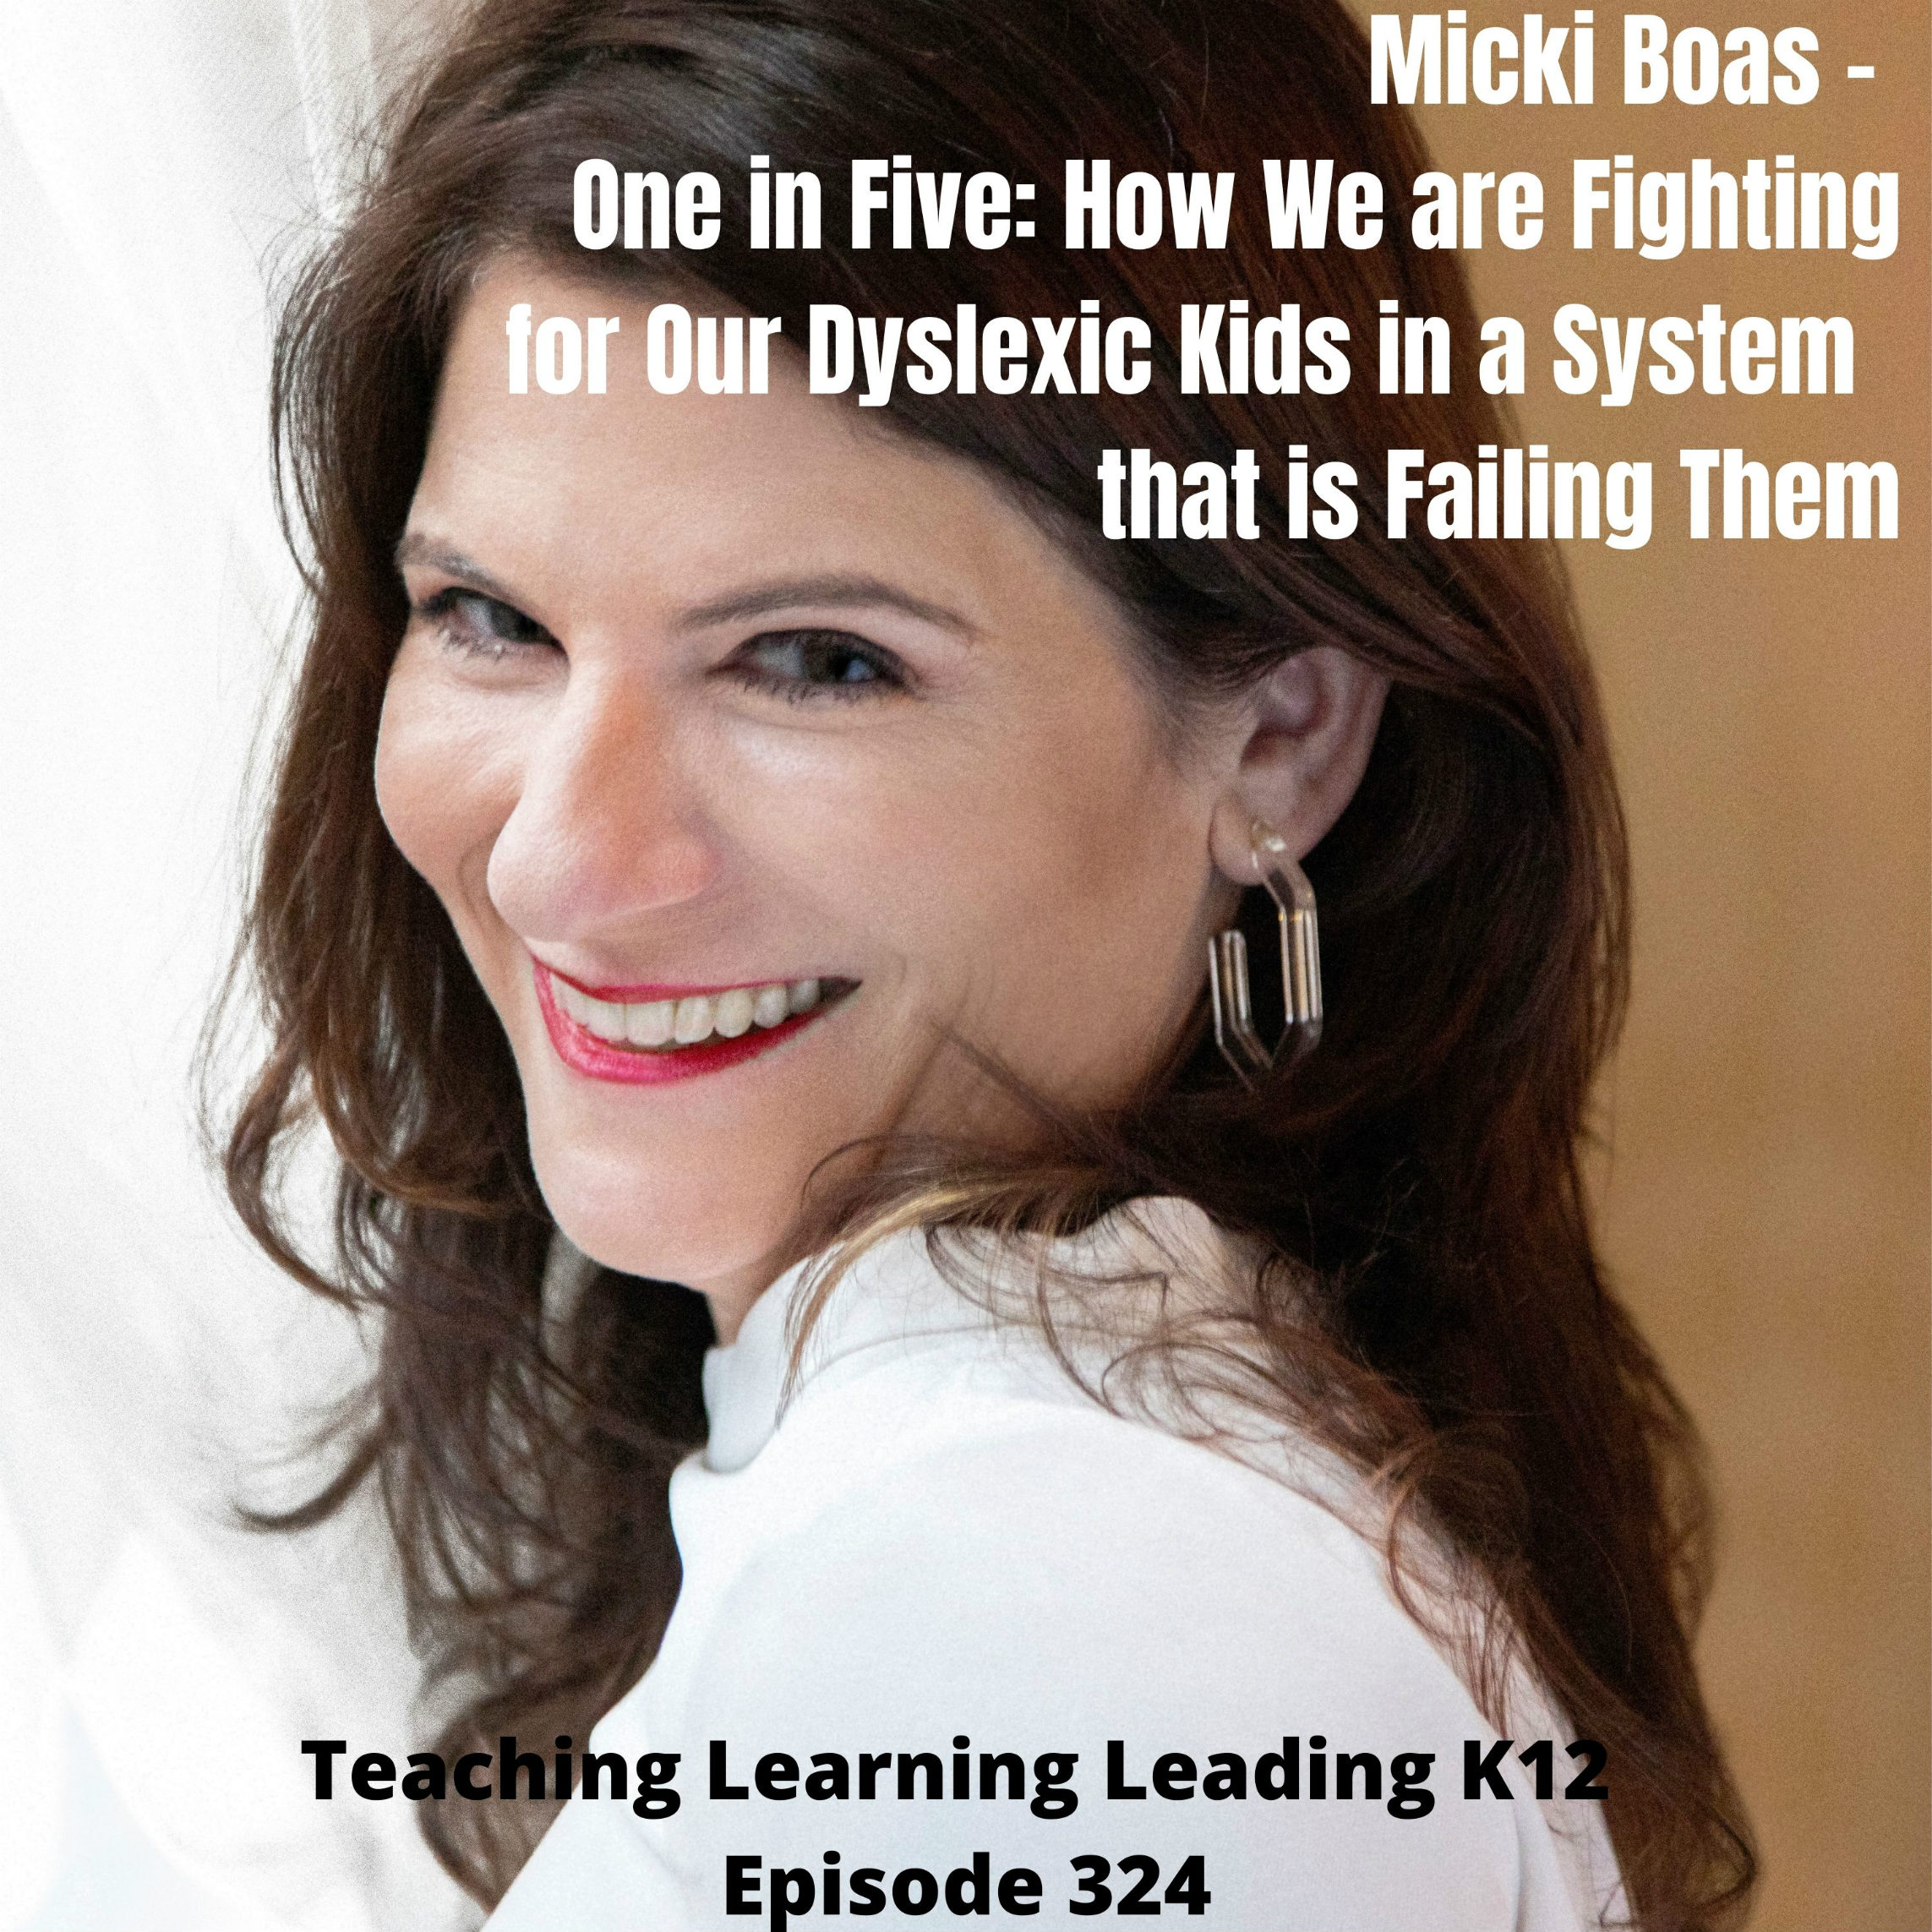 Micki Boas - One in Five: How We are Fighting for Our Dyslexic Kids in a System that is Failing Them - 324